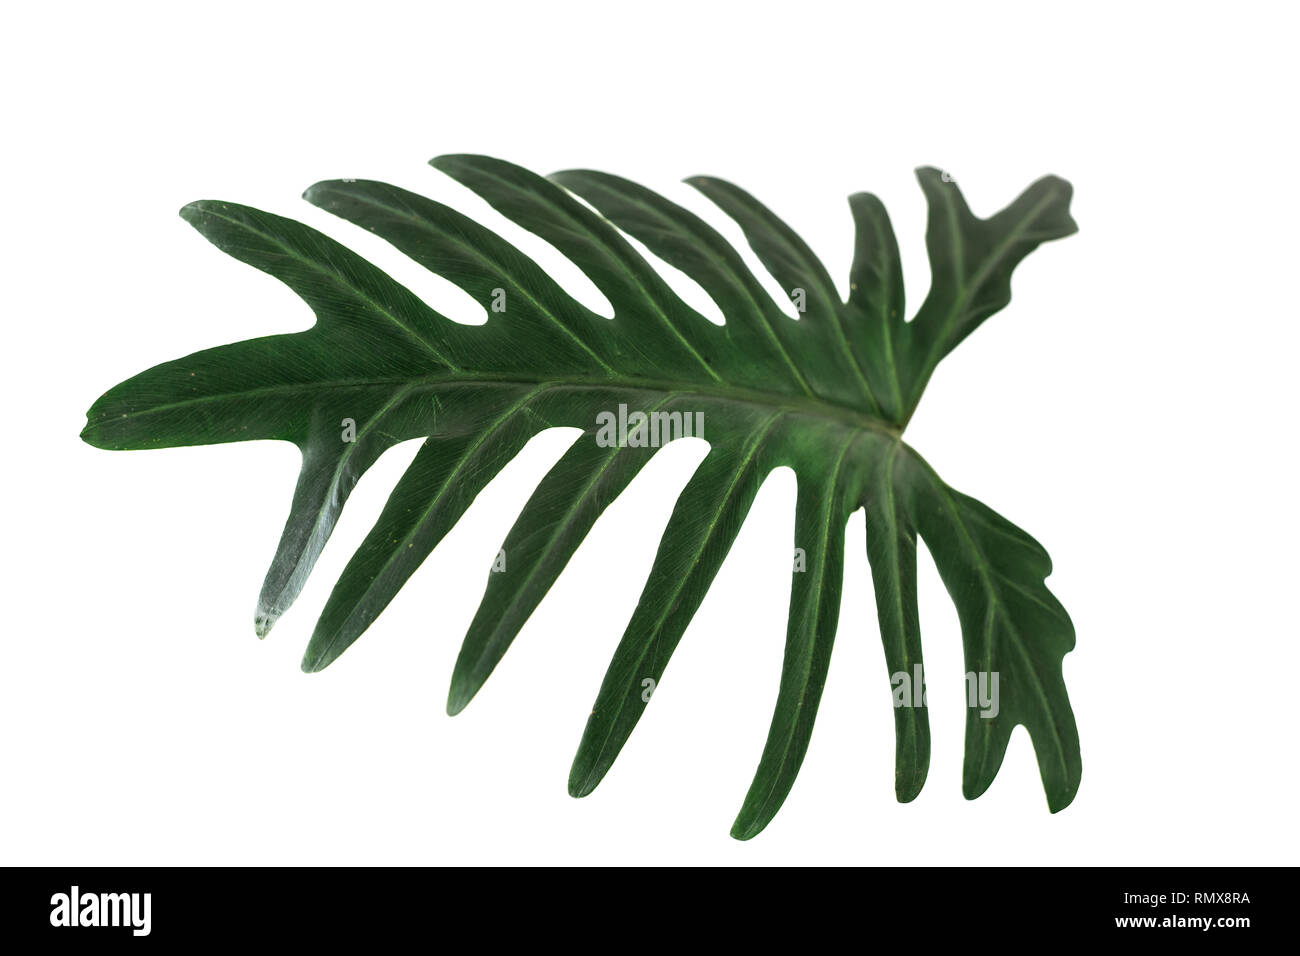 Green tropical leaf on white background with path, Philodendron xanadu Croat. Stock Photo